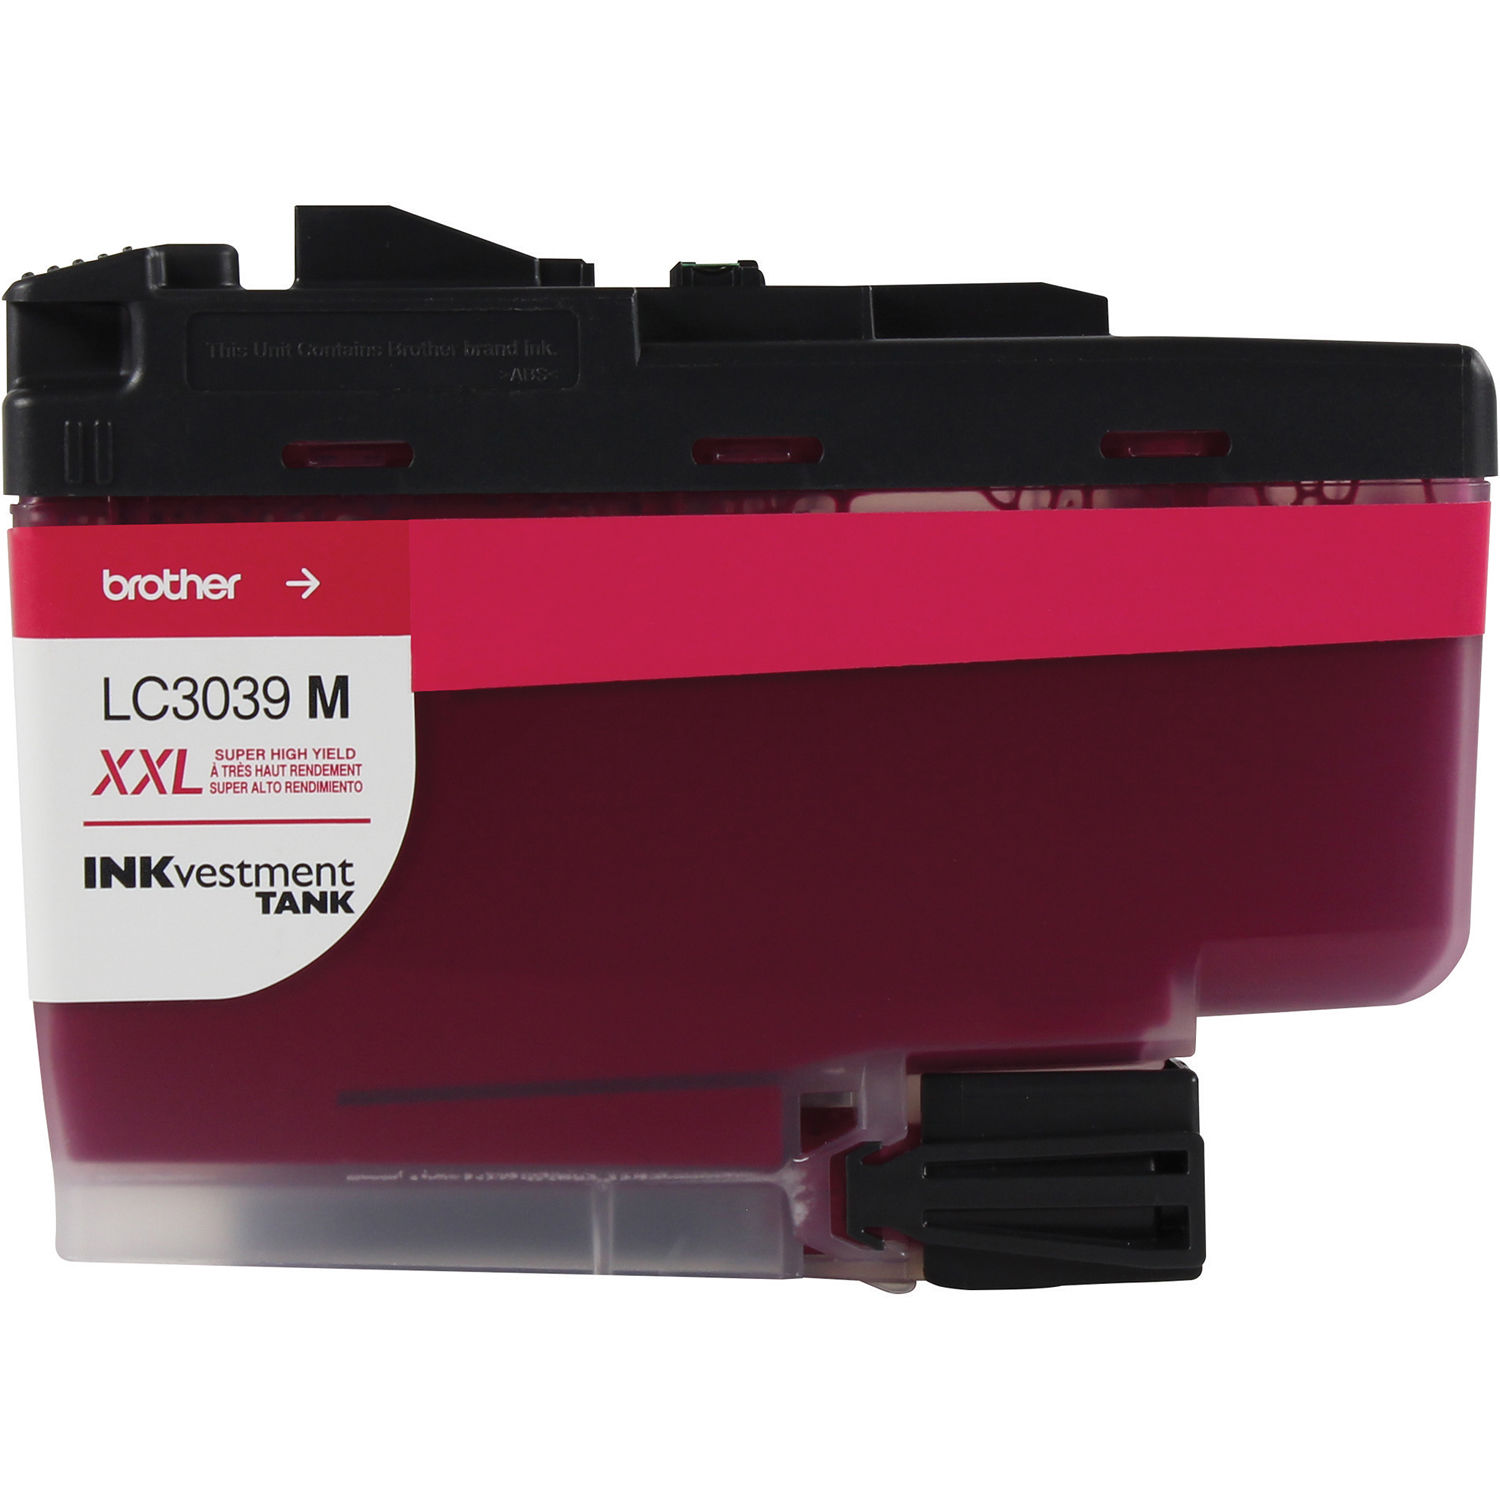 Brother INKvestment Tank Ultra High Yield Magenta Ink Cartridge